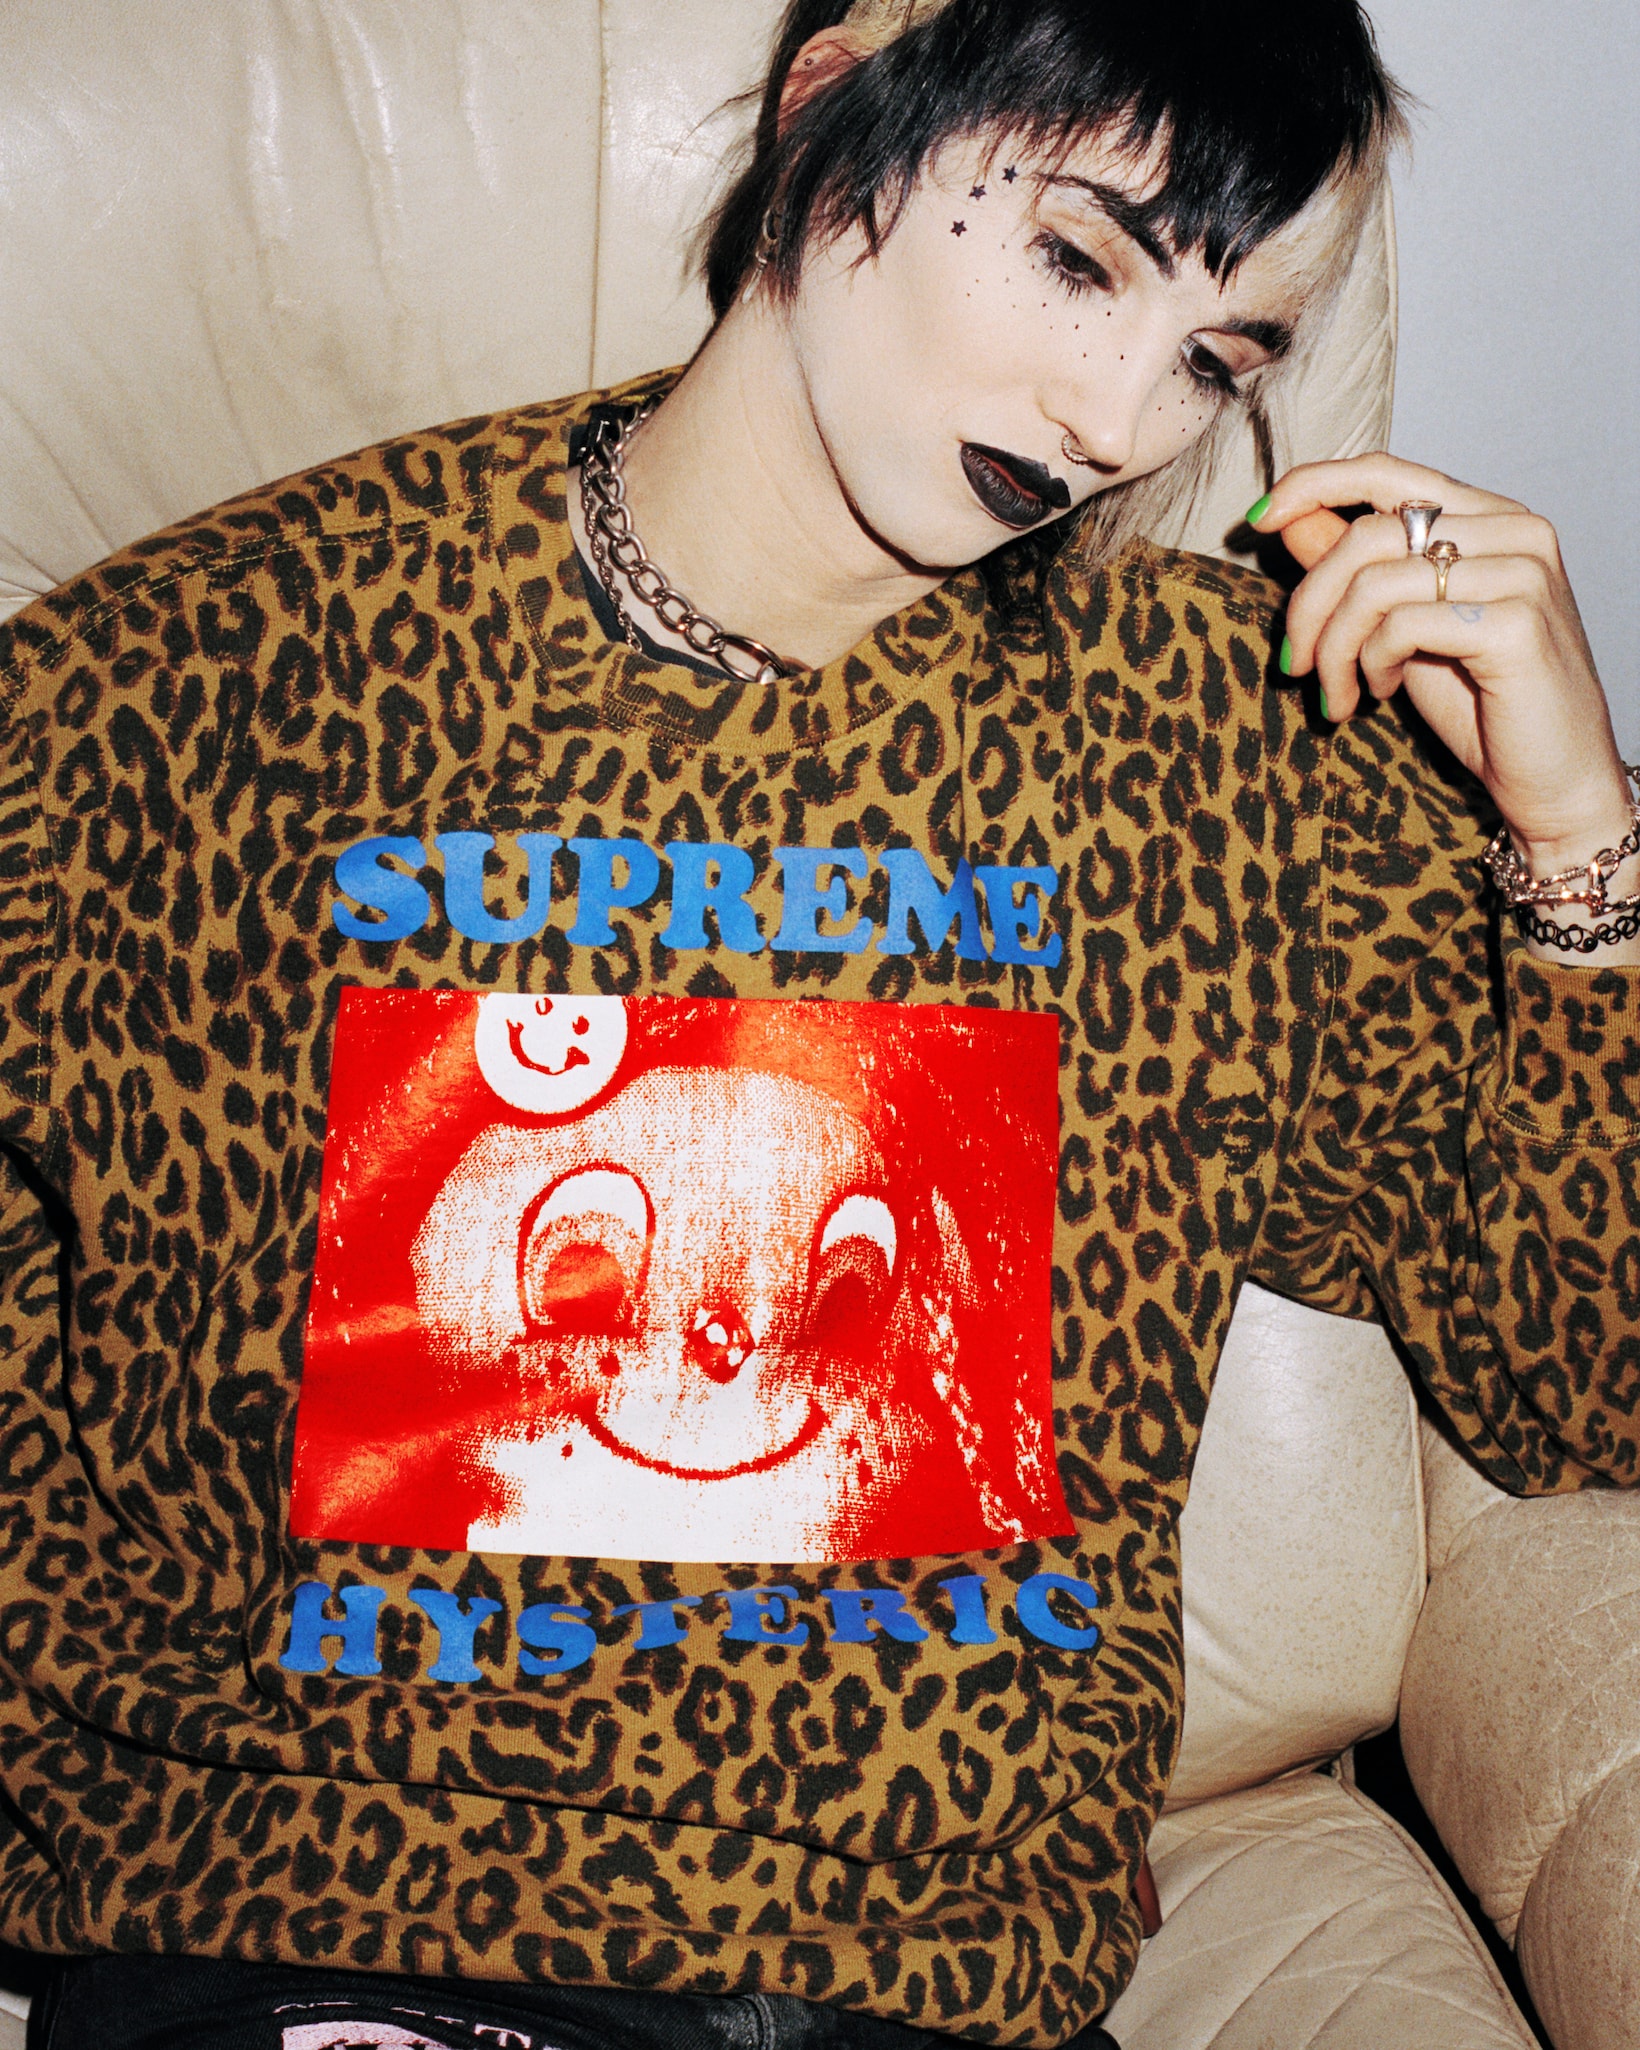 supreme hysteric glamour spring collaboration sweater